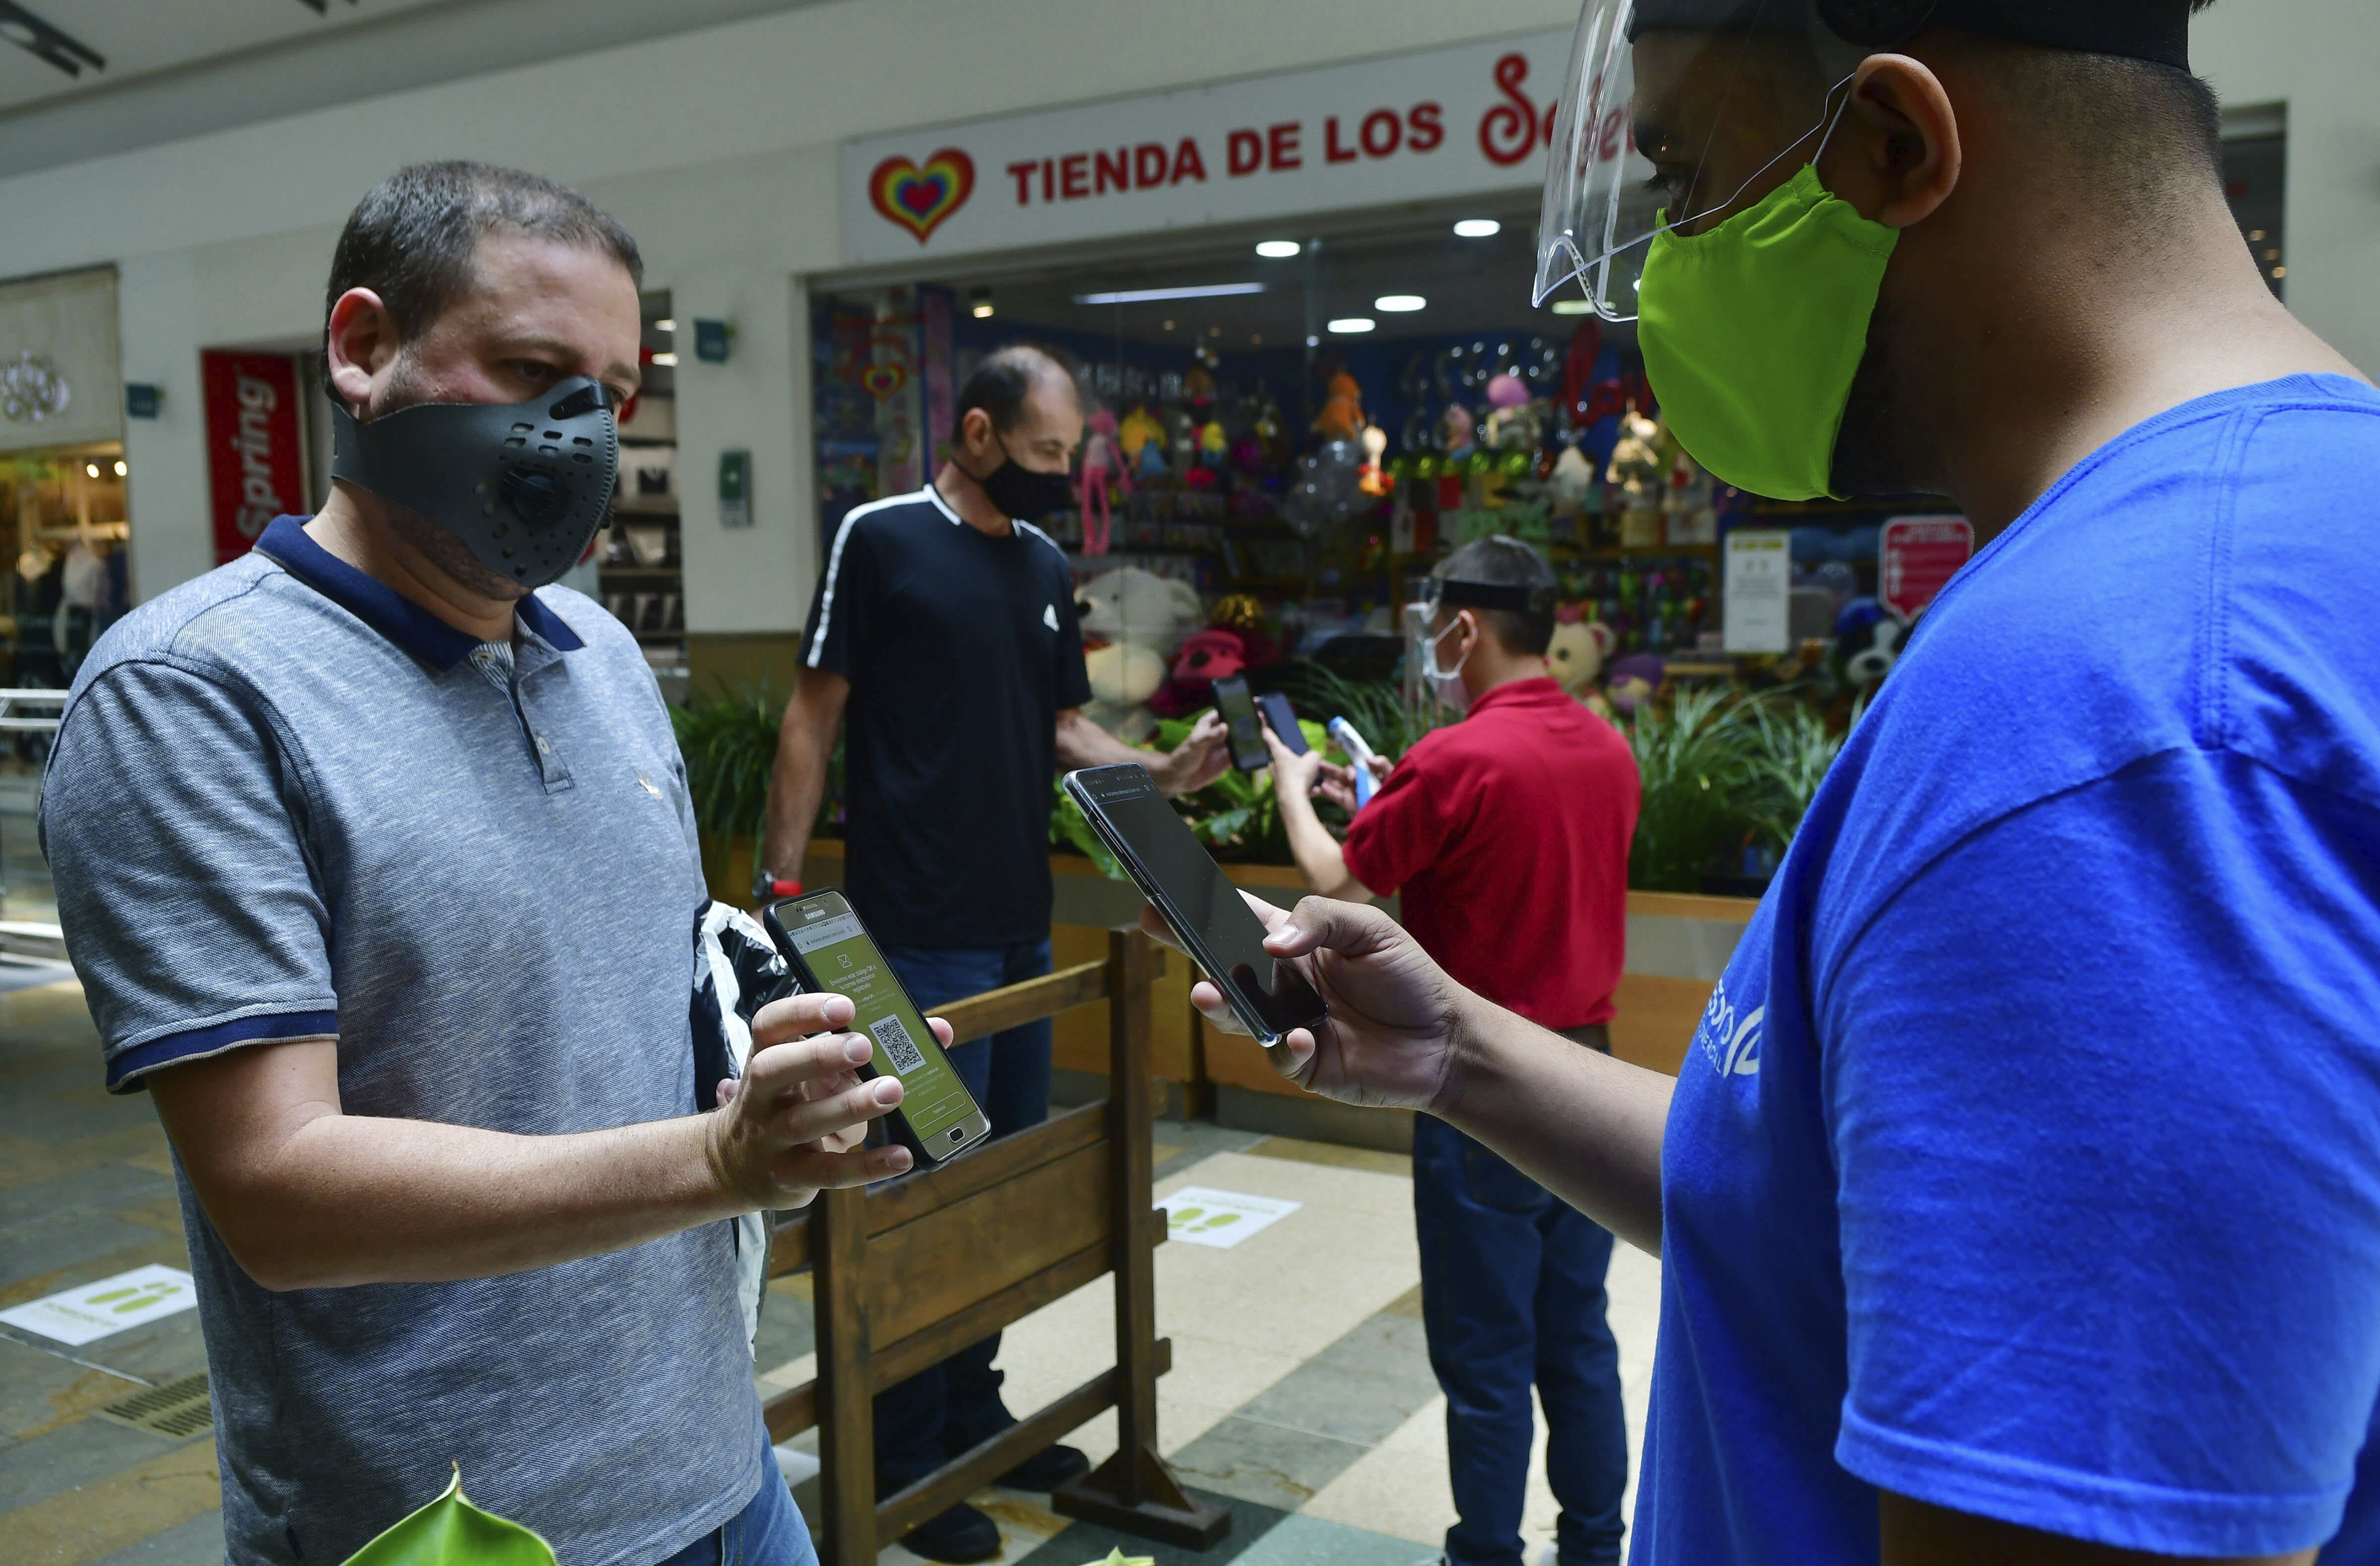 In this June 8, 2020 photo, an El Tesoro mall employee uses his mobile to scan a customer's app to verify he is registered for entry, in Medellin, Colombia, Monday, June 8, 2020. The metropolis recently went five weeks without a single COVID-19 death. (AP Photo/Luis Benavides)